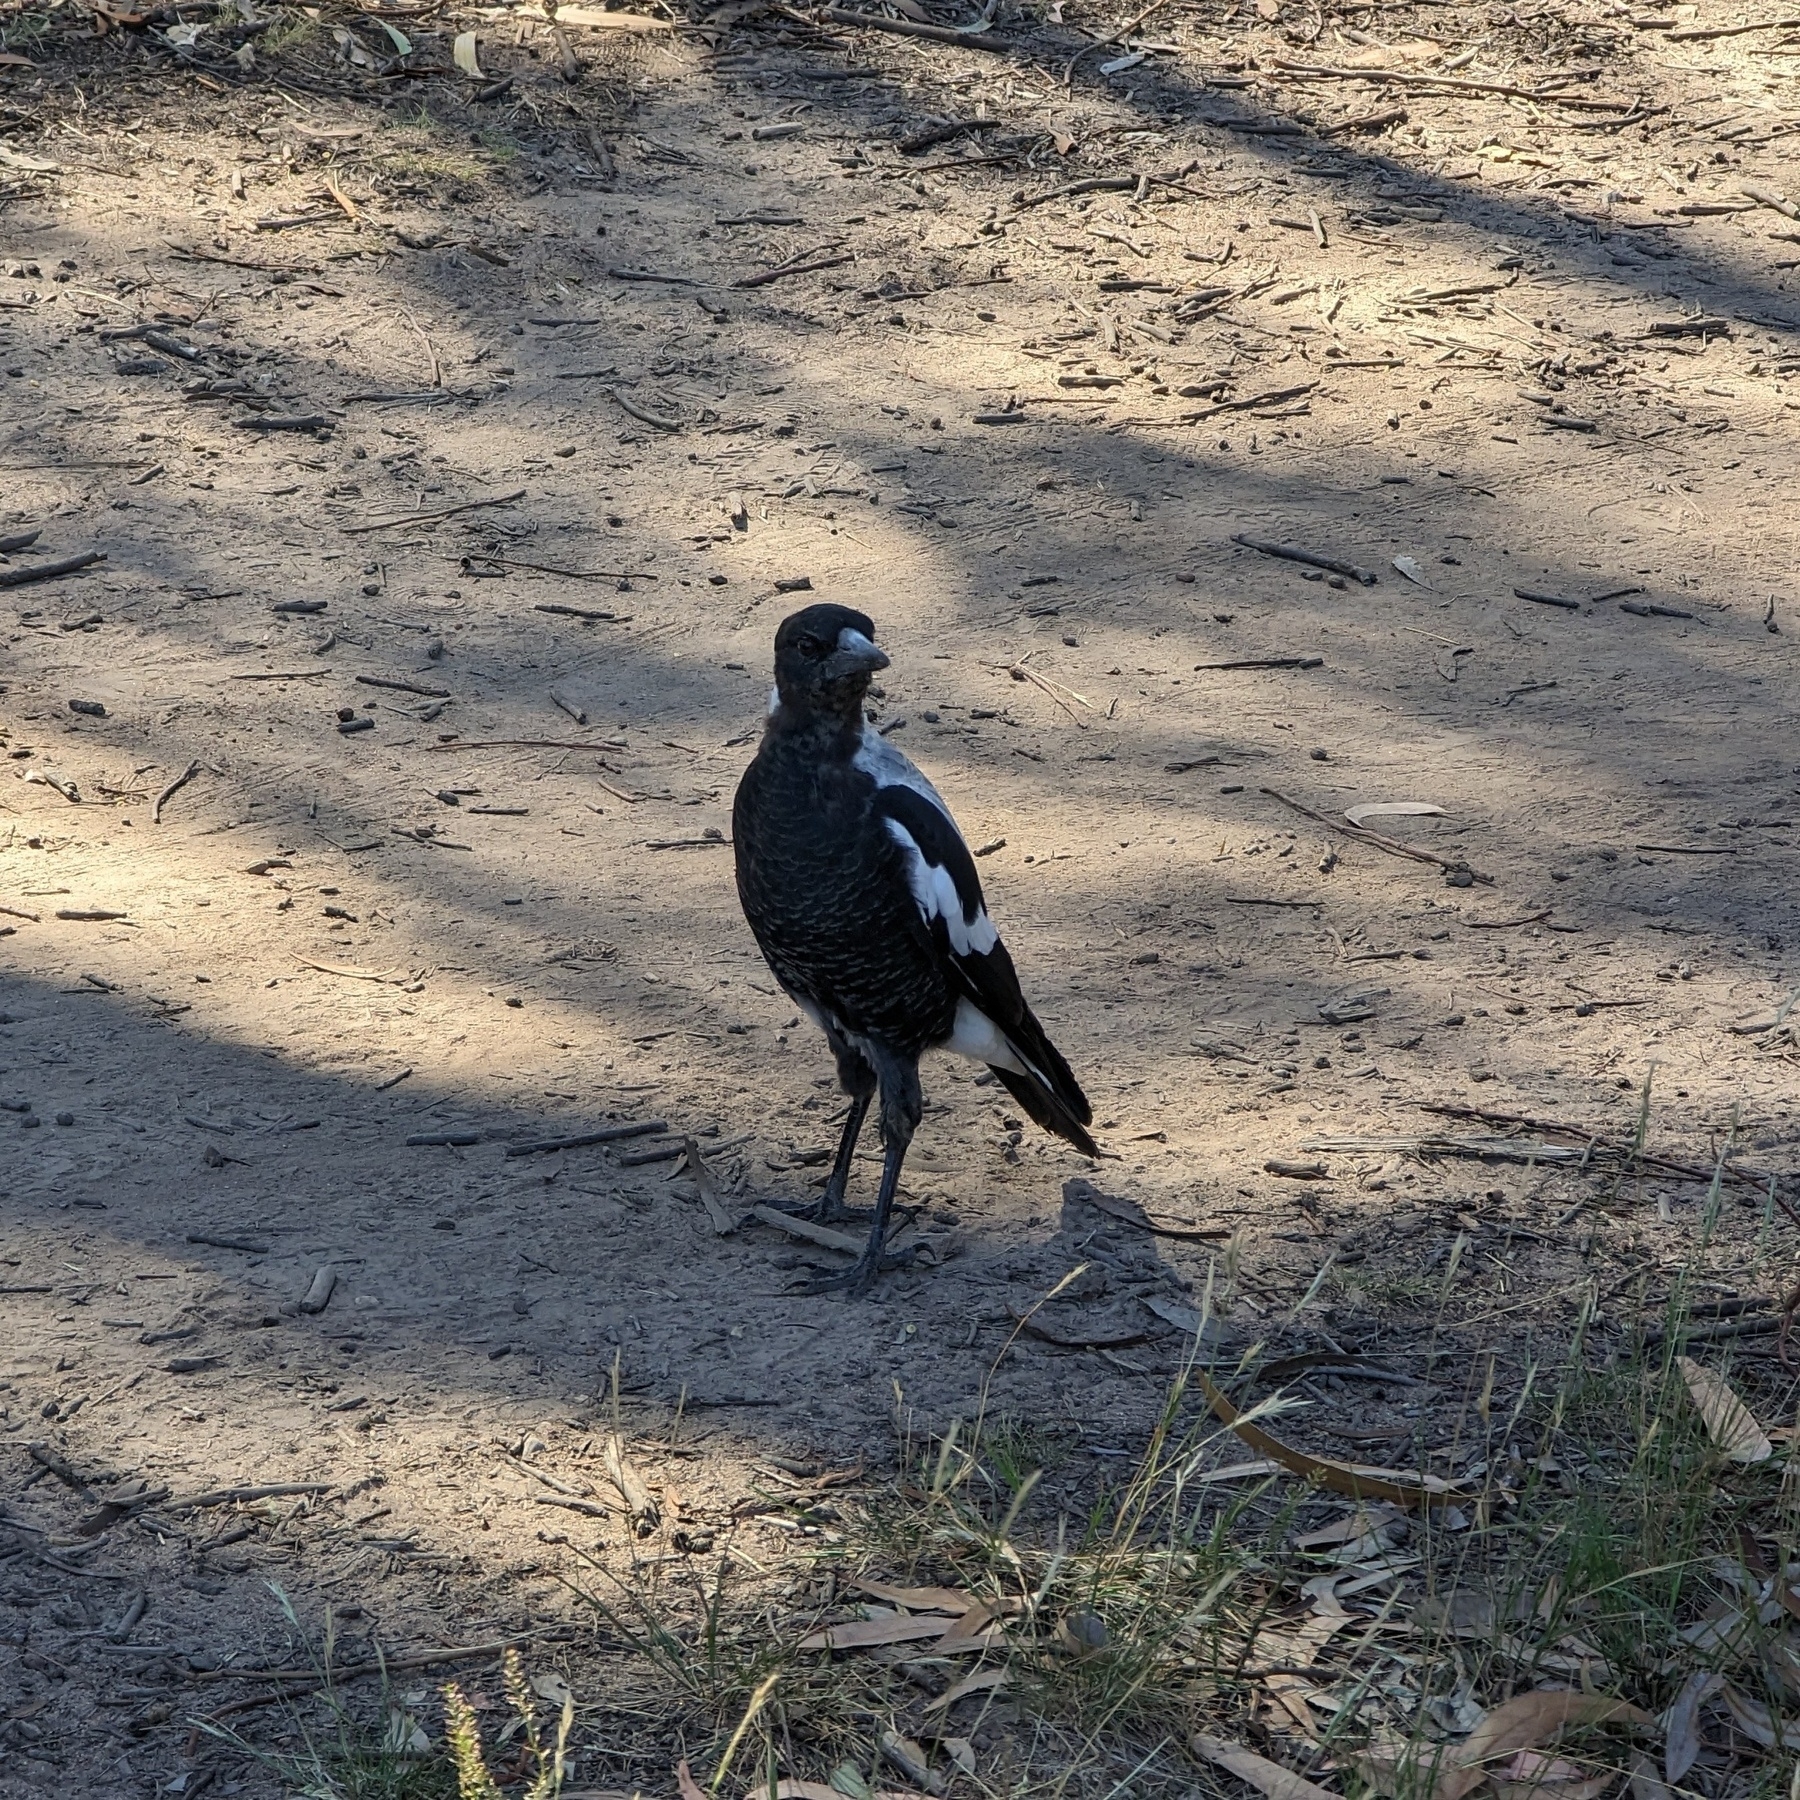 A juvenile magpie on a dirt track.